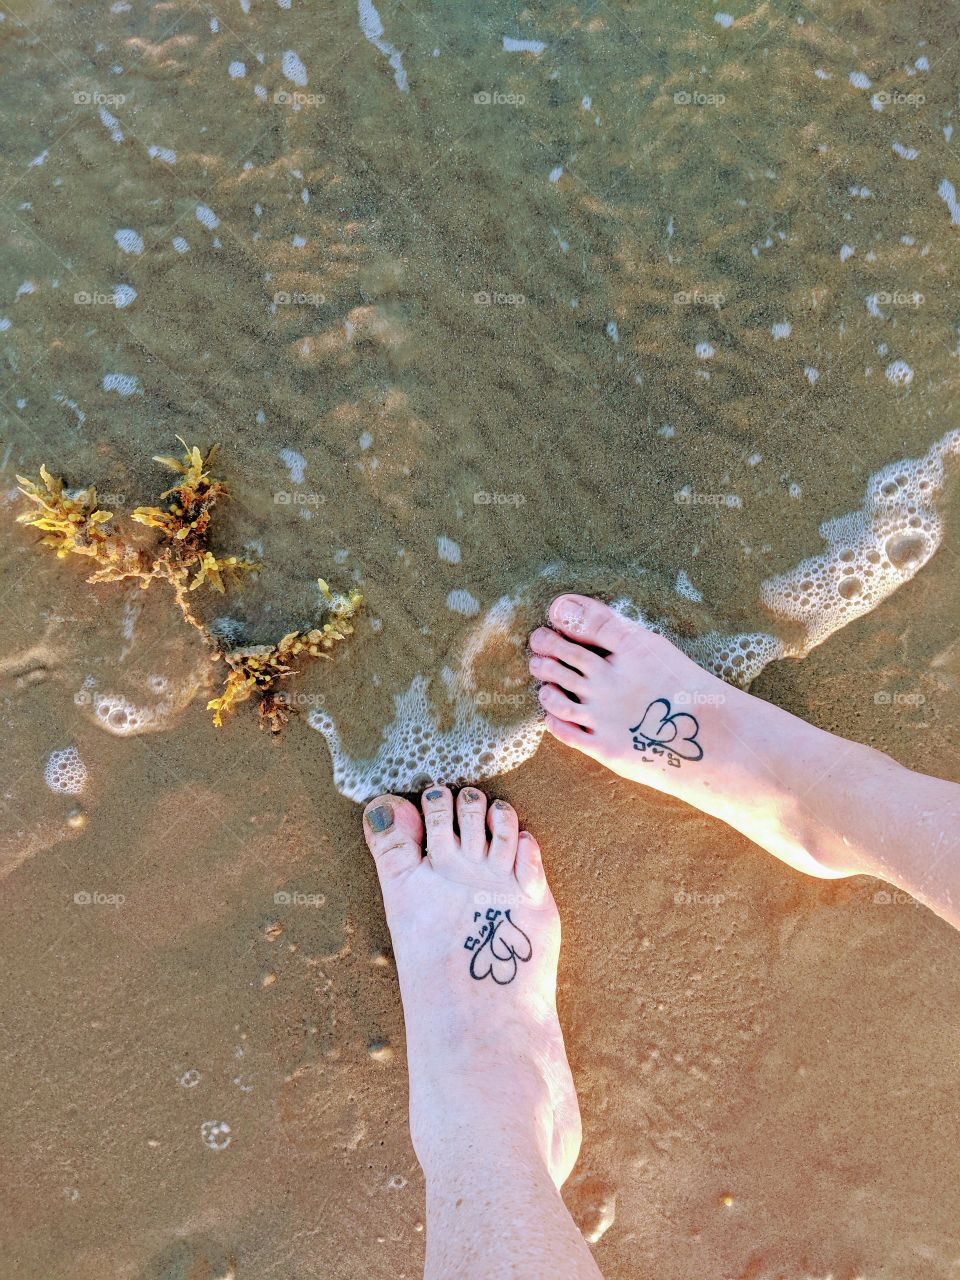 Feeling the sand under our feet.